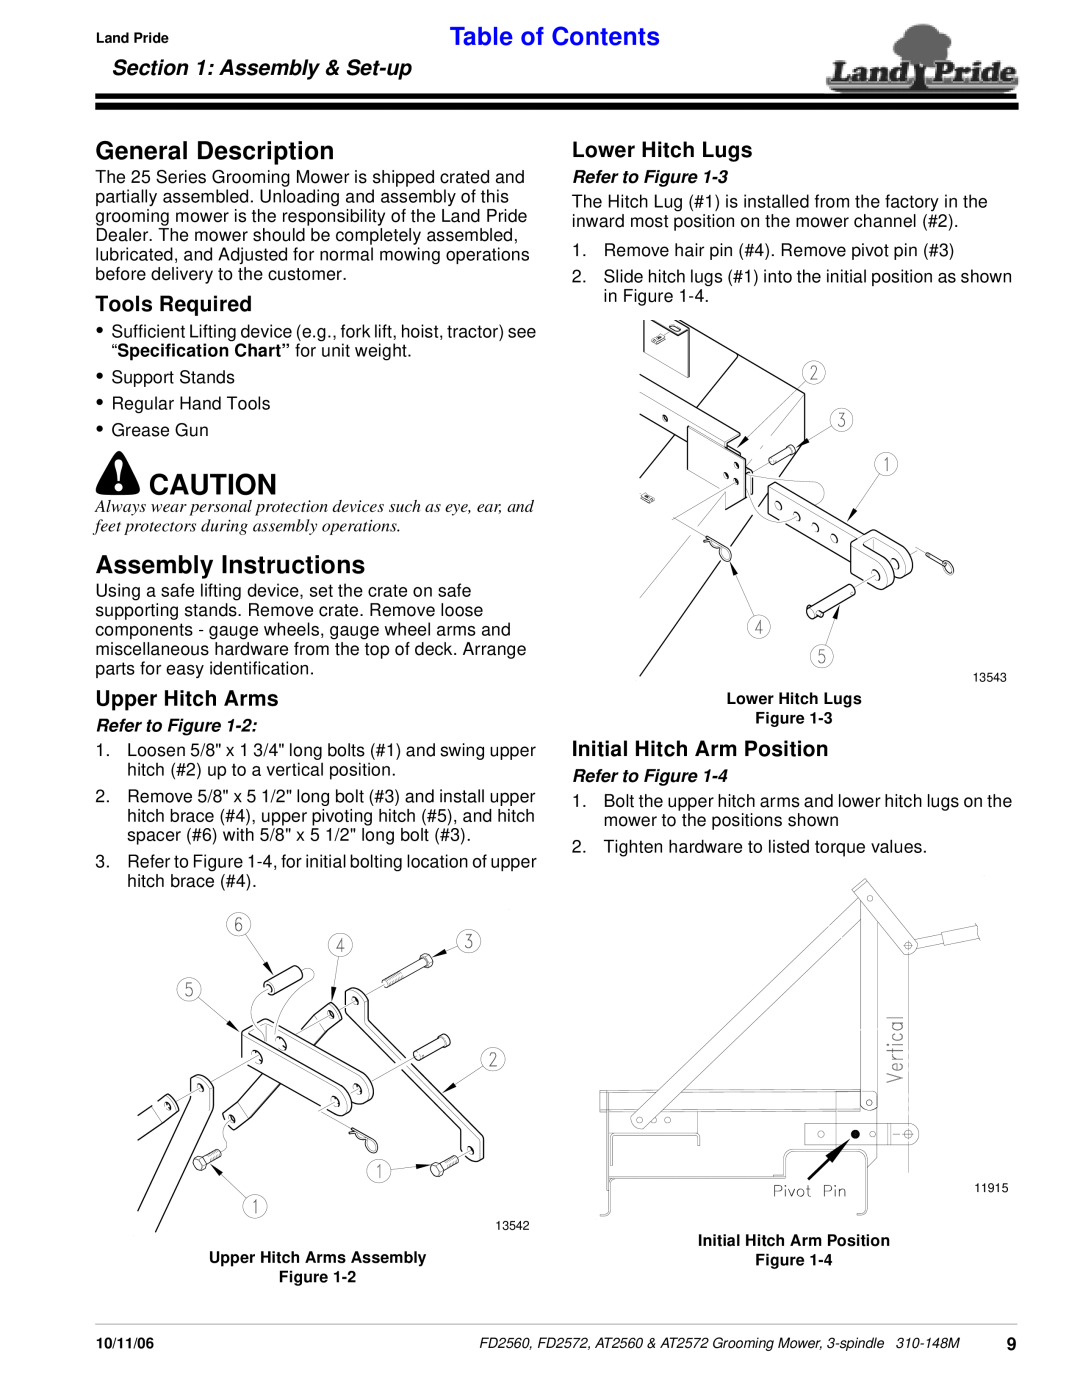 Land Pride FD2572 manual General Description, Assembly Instructions, Assembly & Set-up, Table of Contents, Refer to Figure 